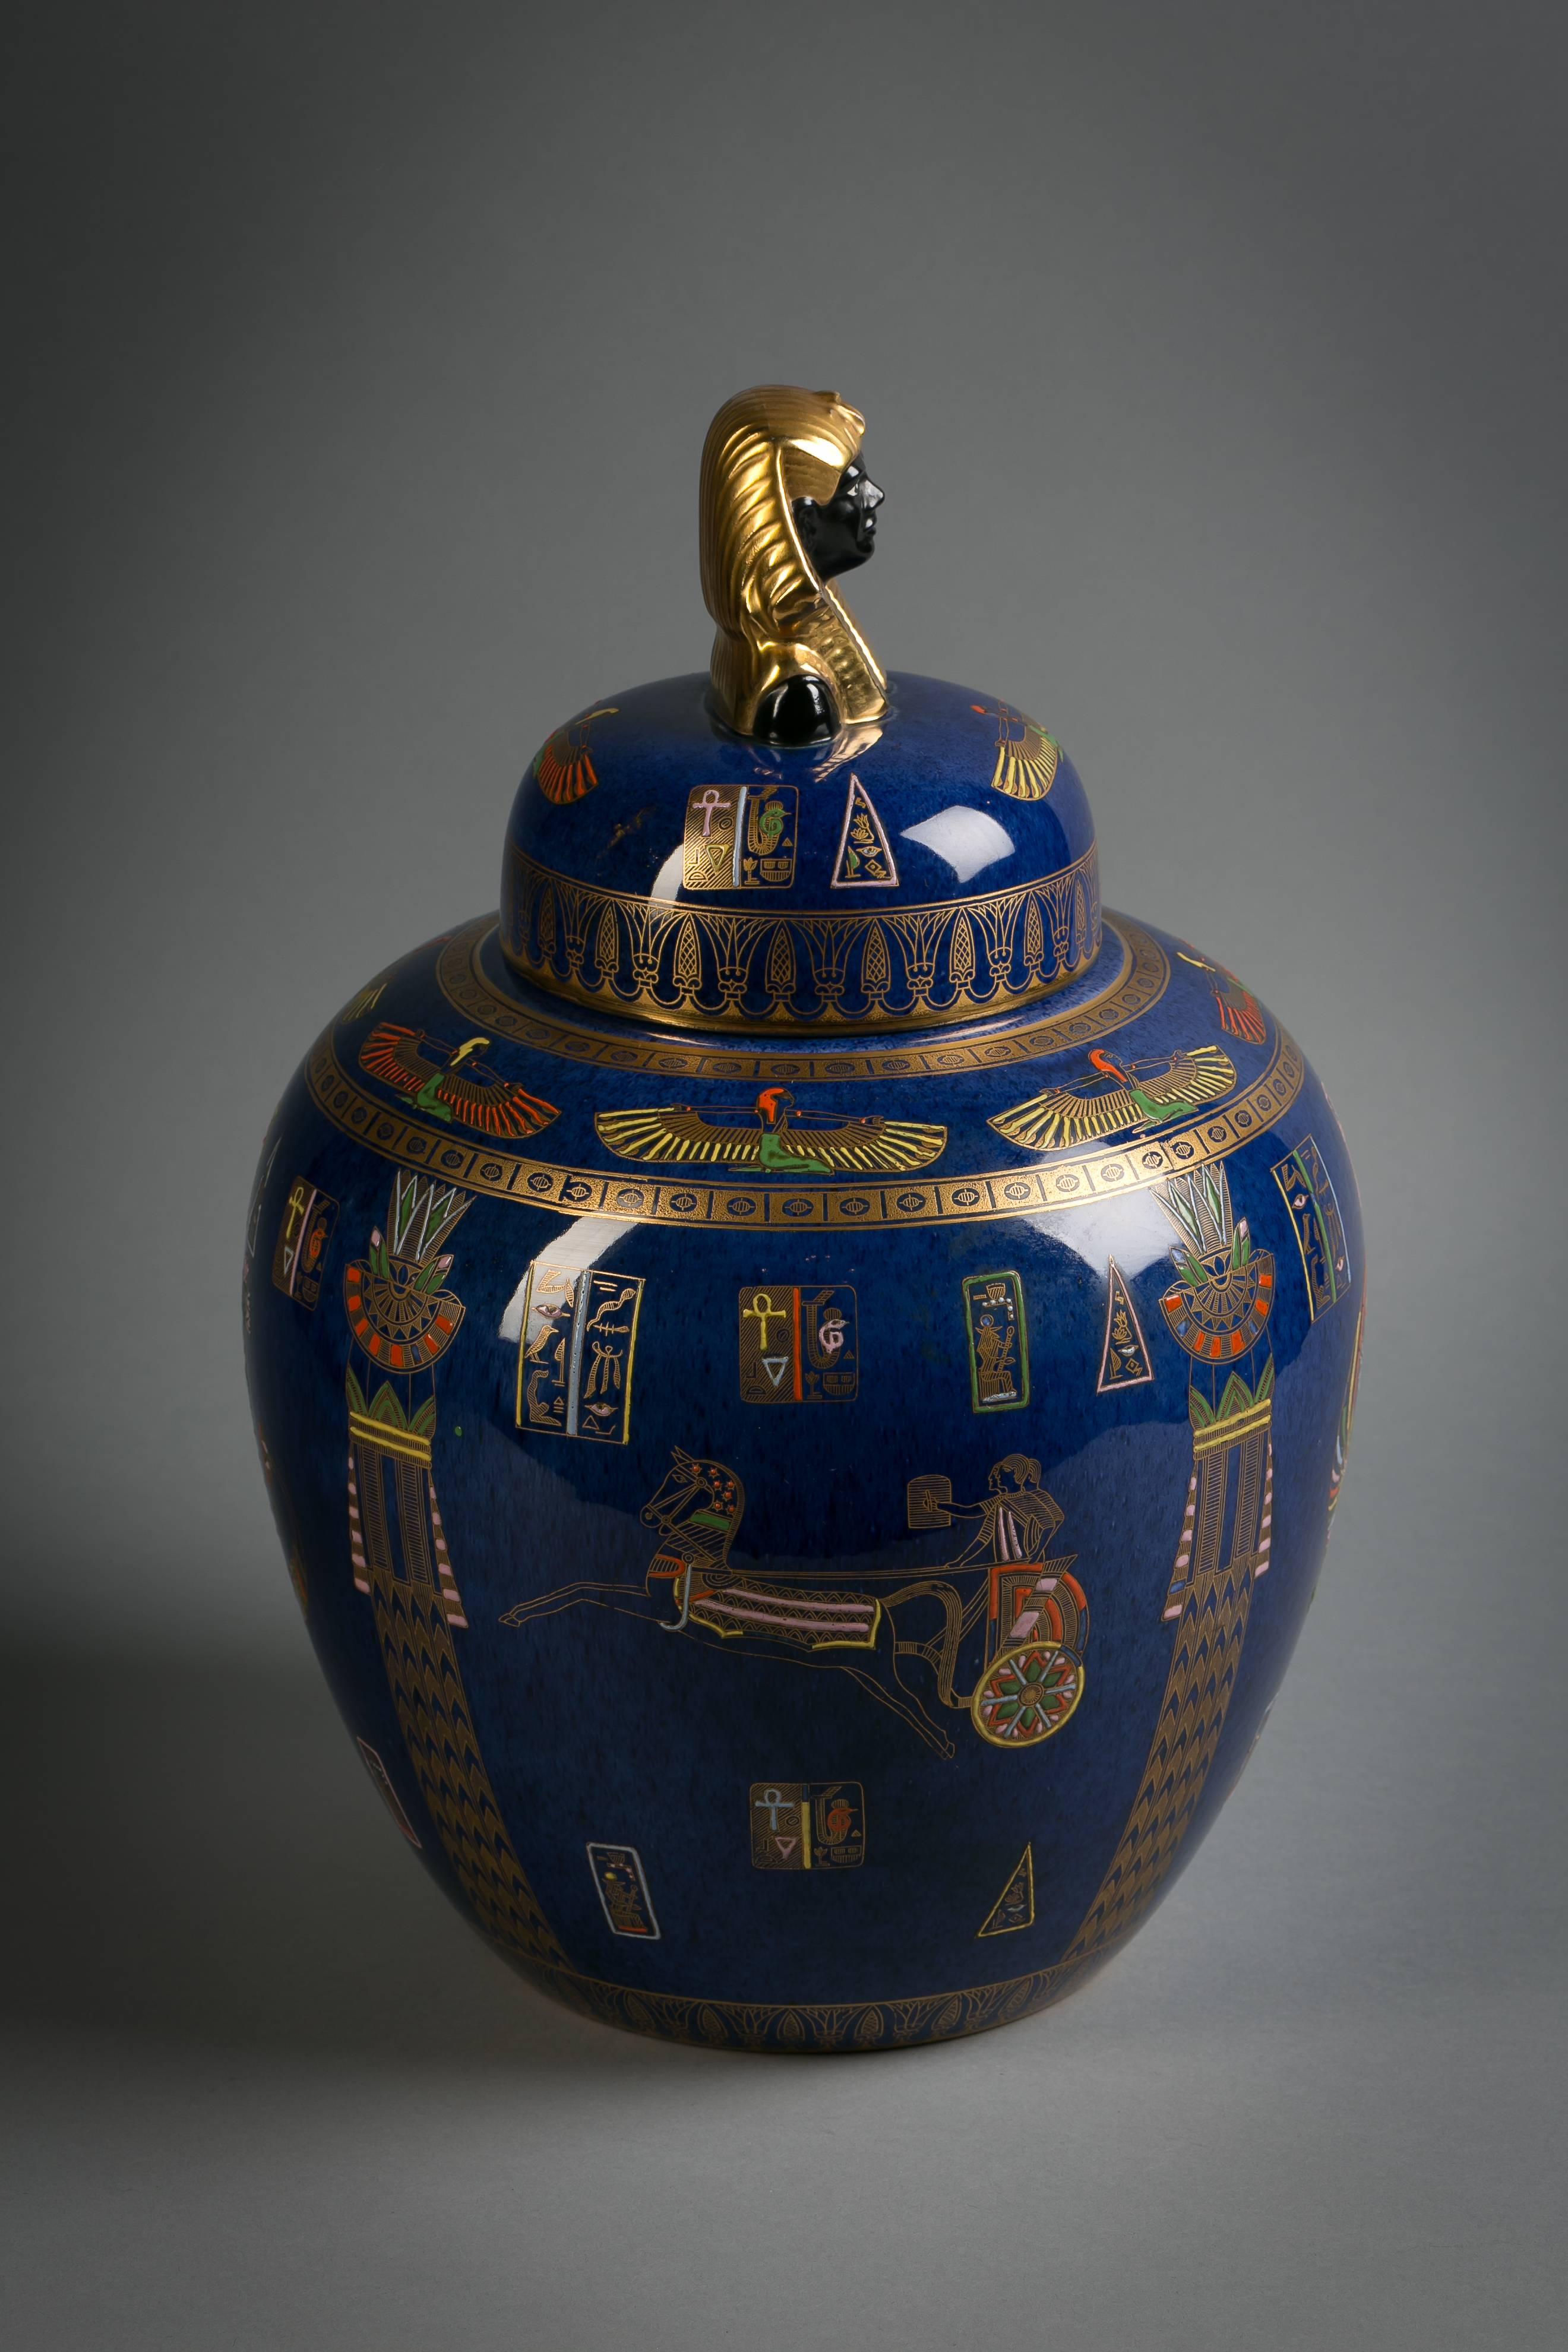 Enameled and gilt with Egyptian motifs. Printed marks in black and gilt.